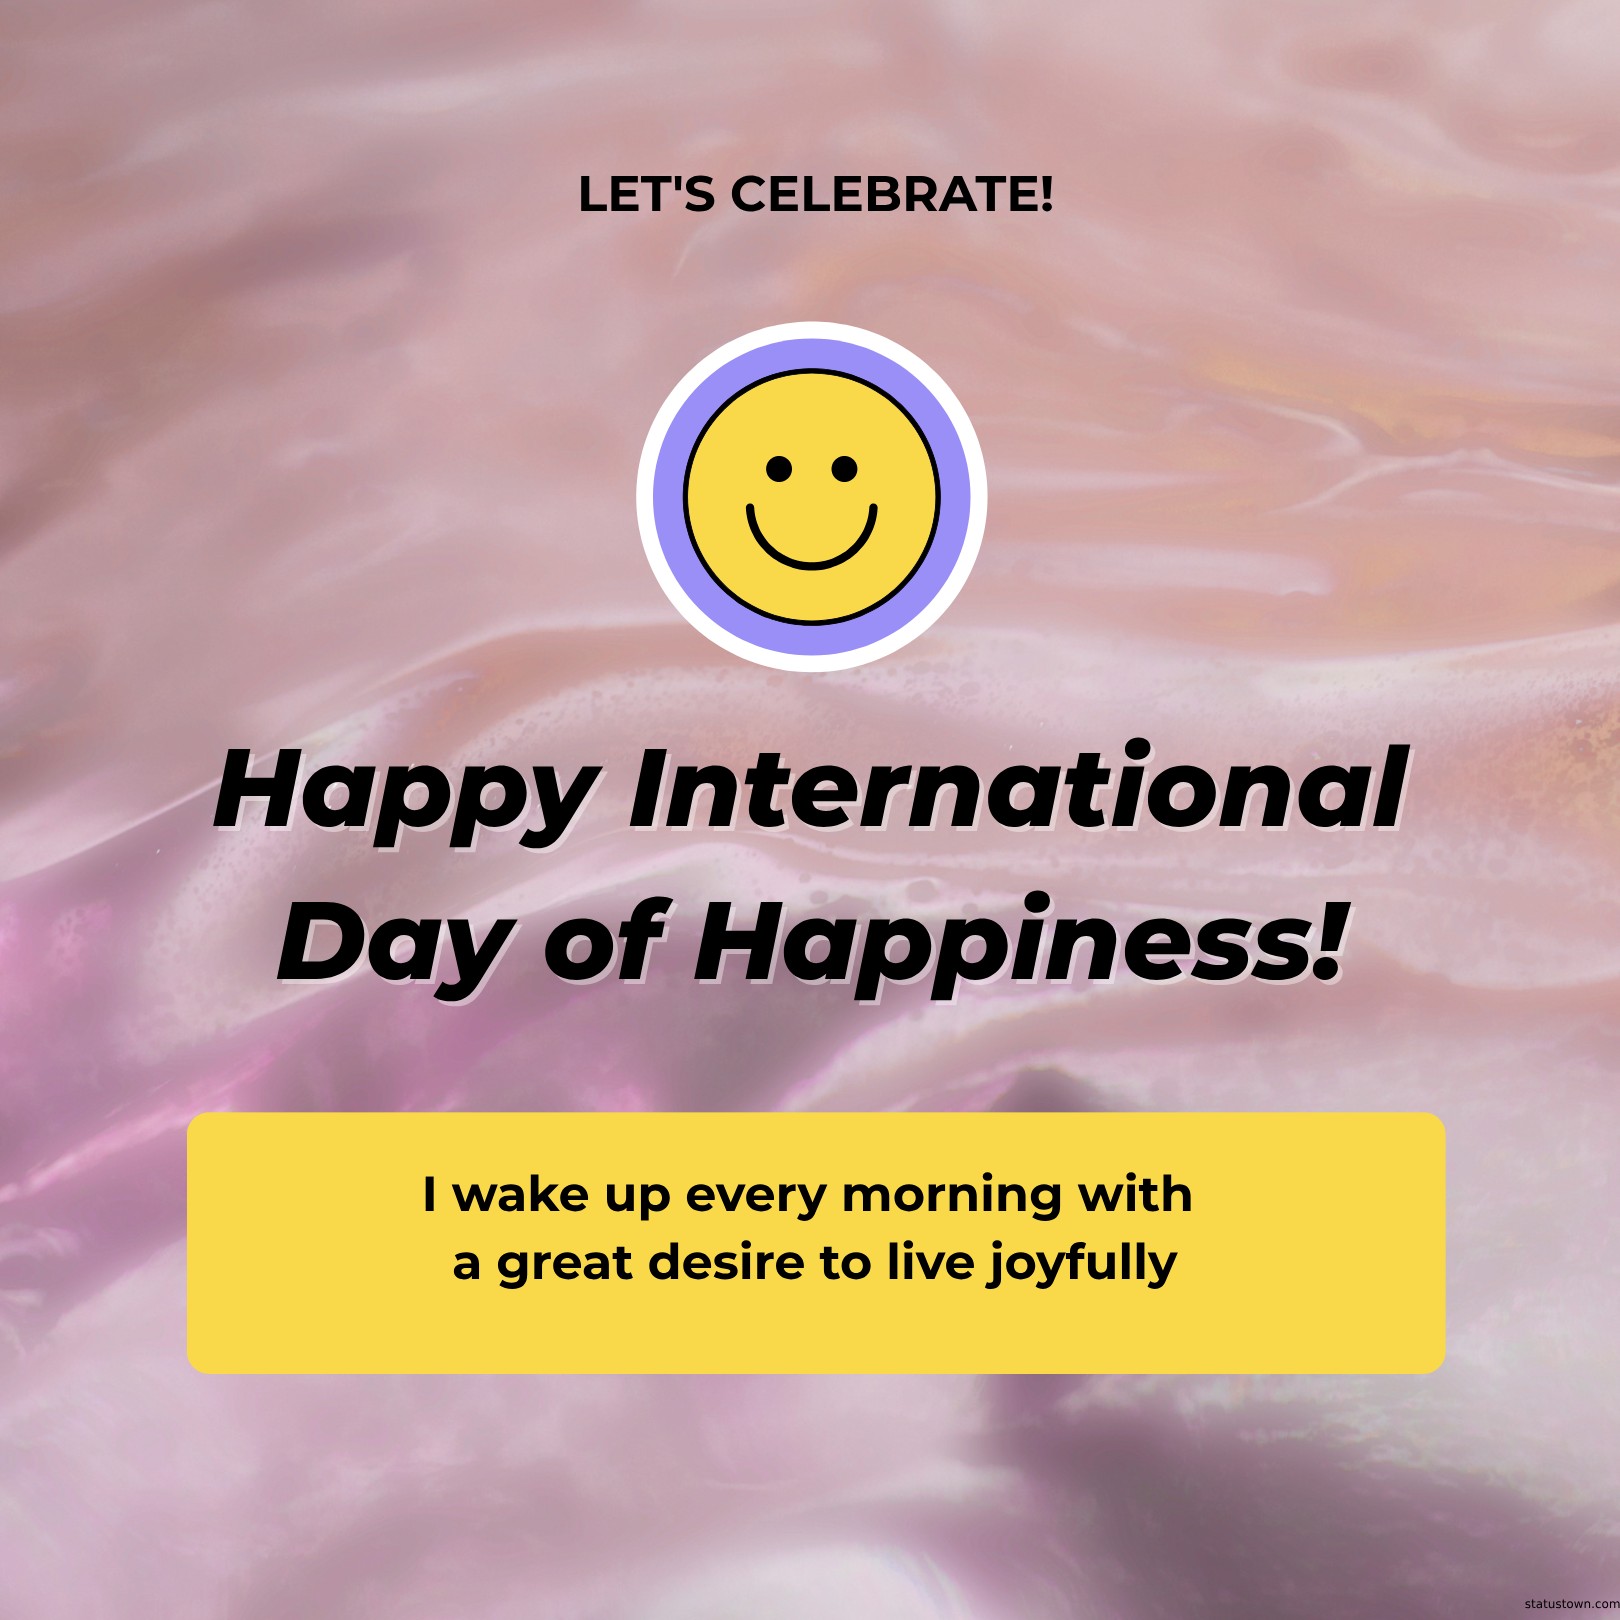 I wake up every morning with a great desire to live joyfully. - international day of happiness wishes wishes, messages, and status